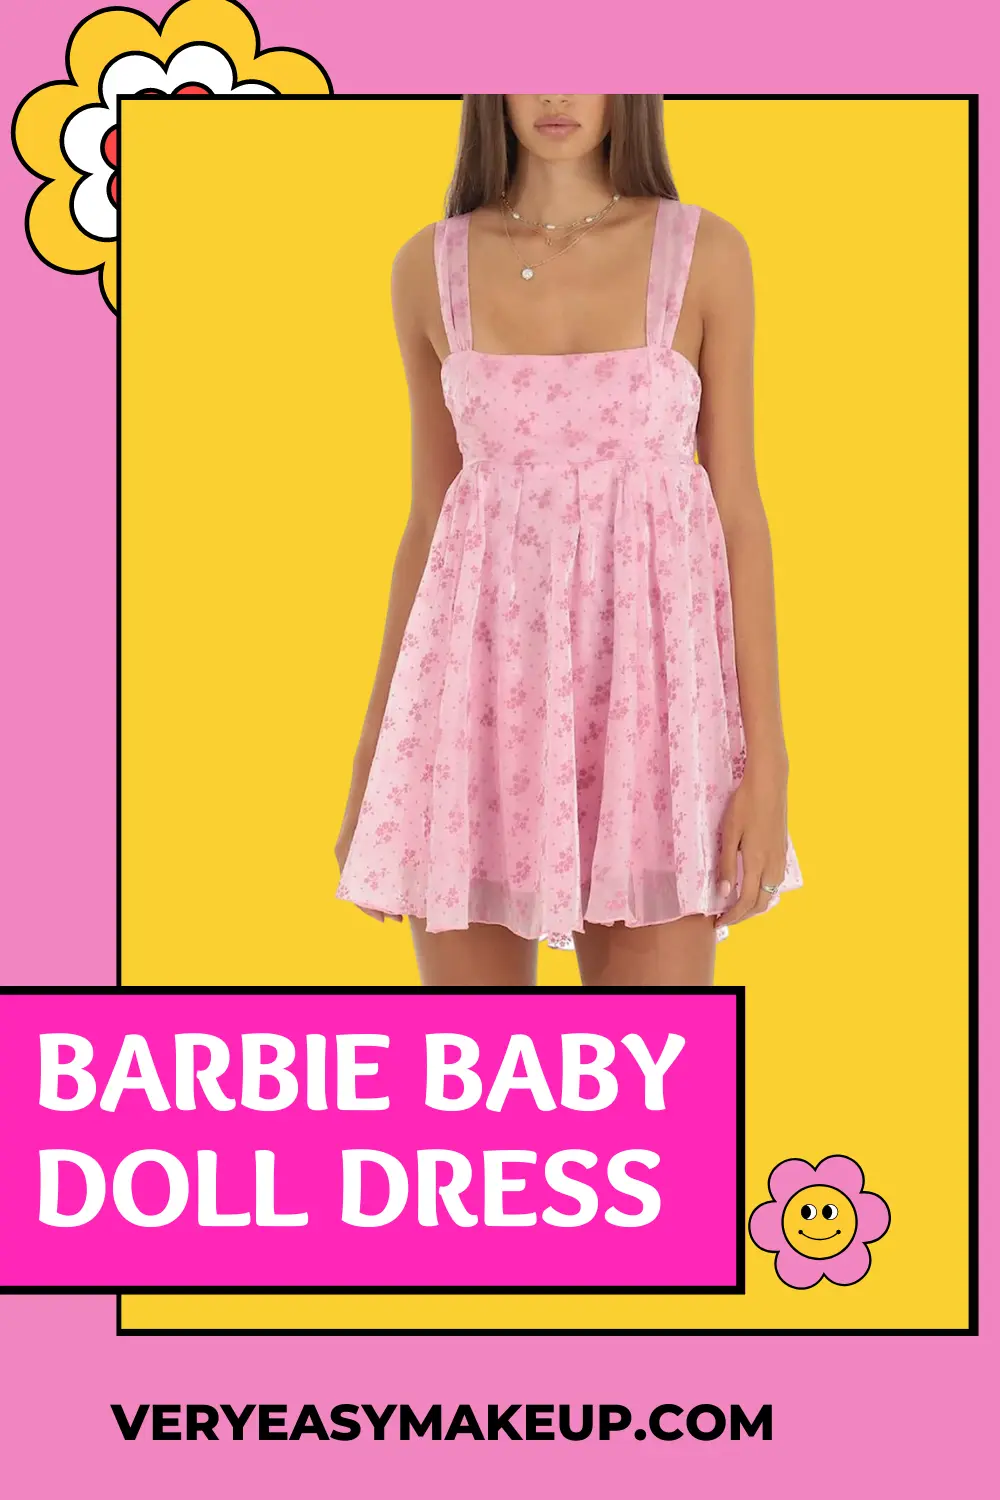 Barbie outfit ideas baby doll dress